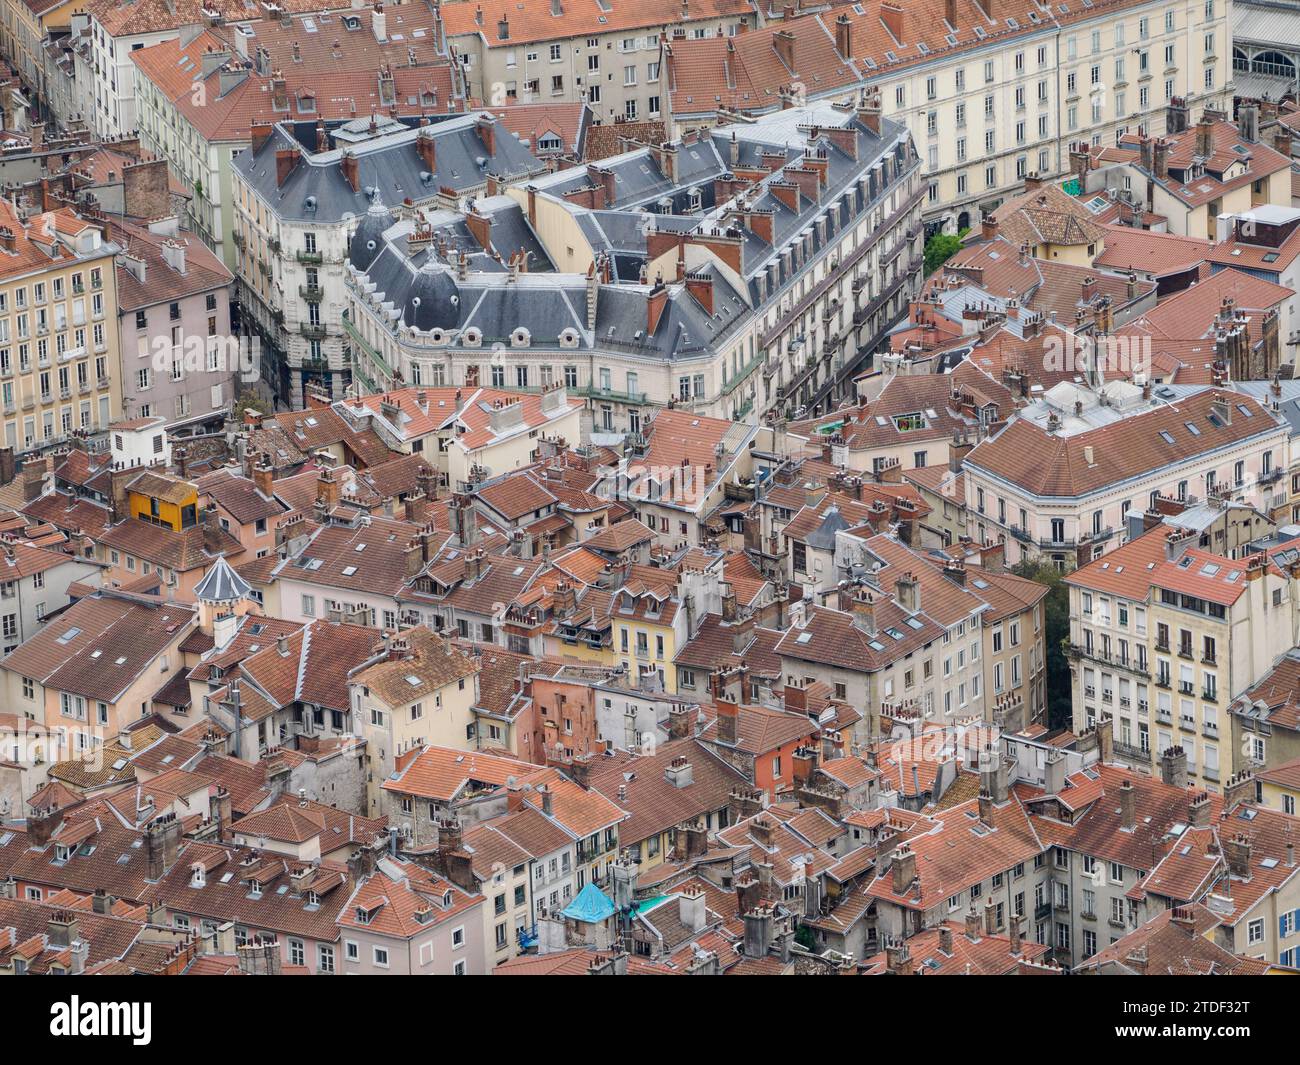 Th center of Grenoble as viewed from the Bastille, Grenoble, Auvergne-Rhone-Alpes, France, Europe Stock Photo